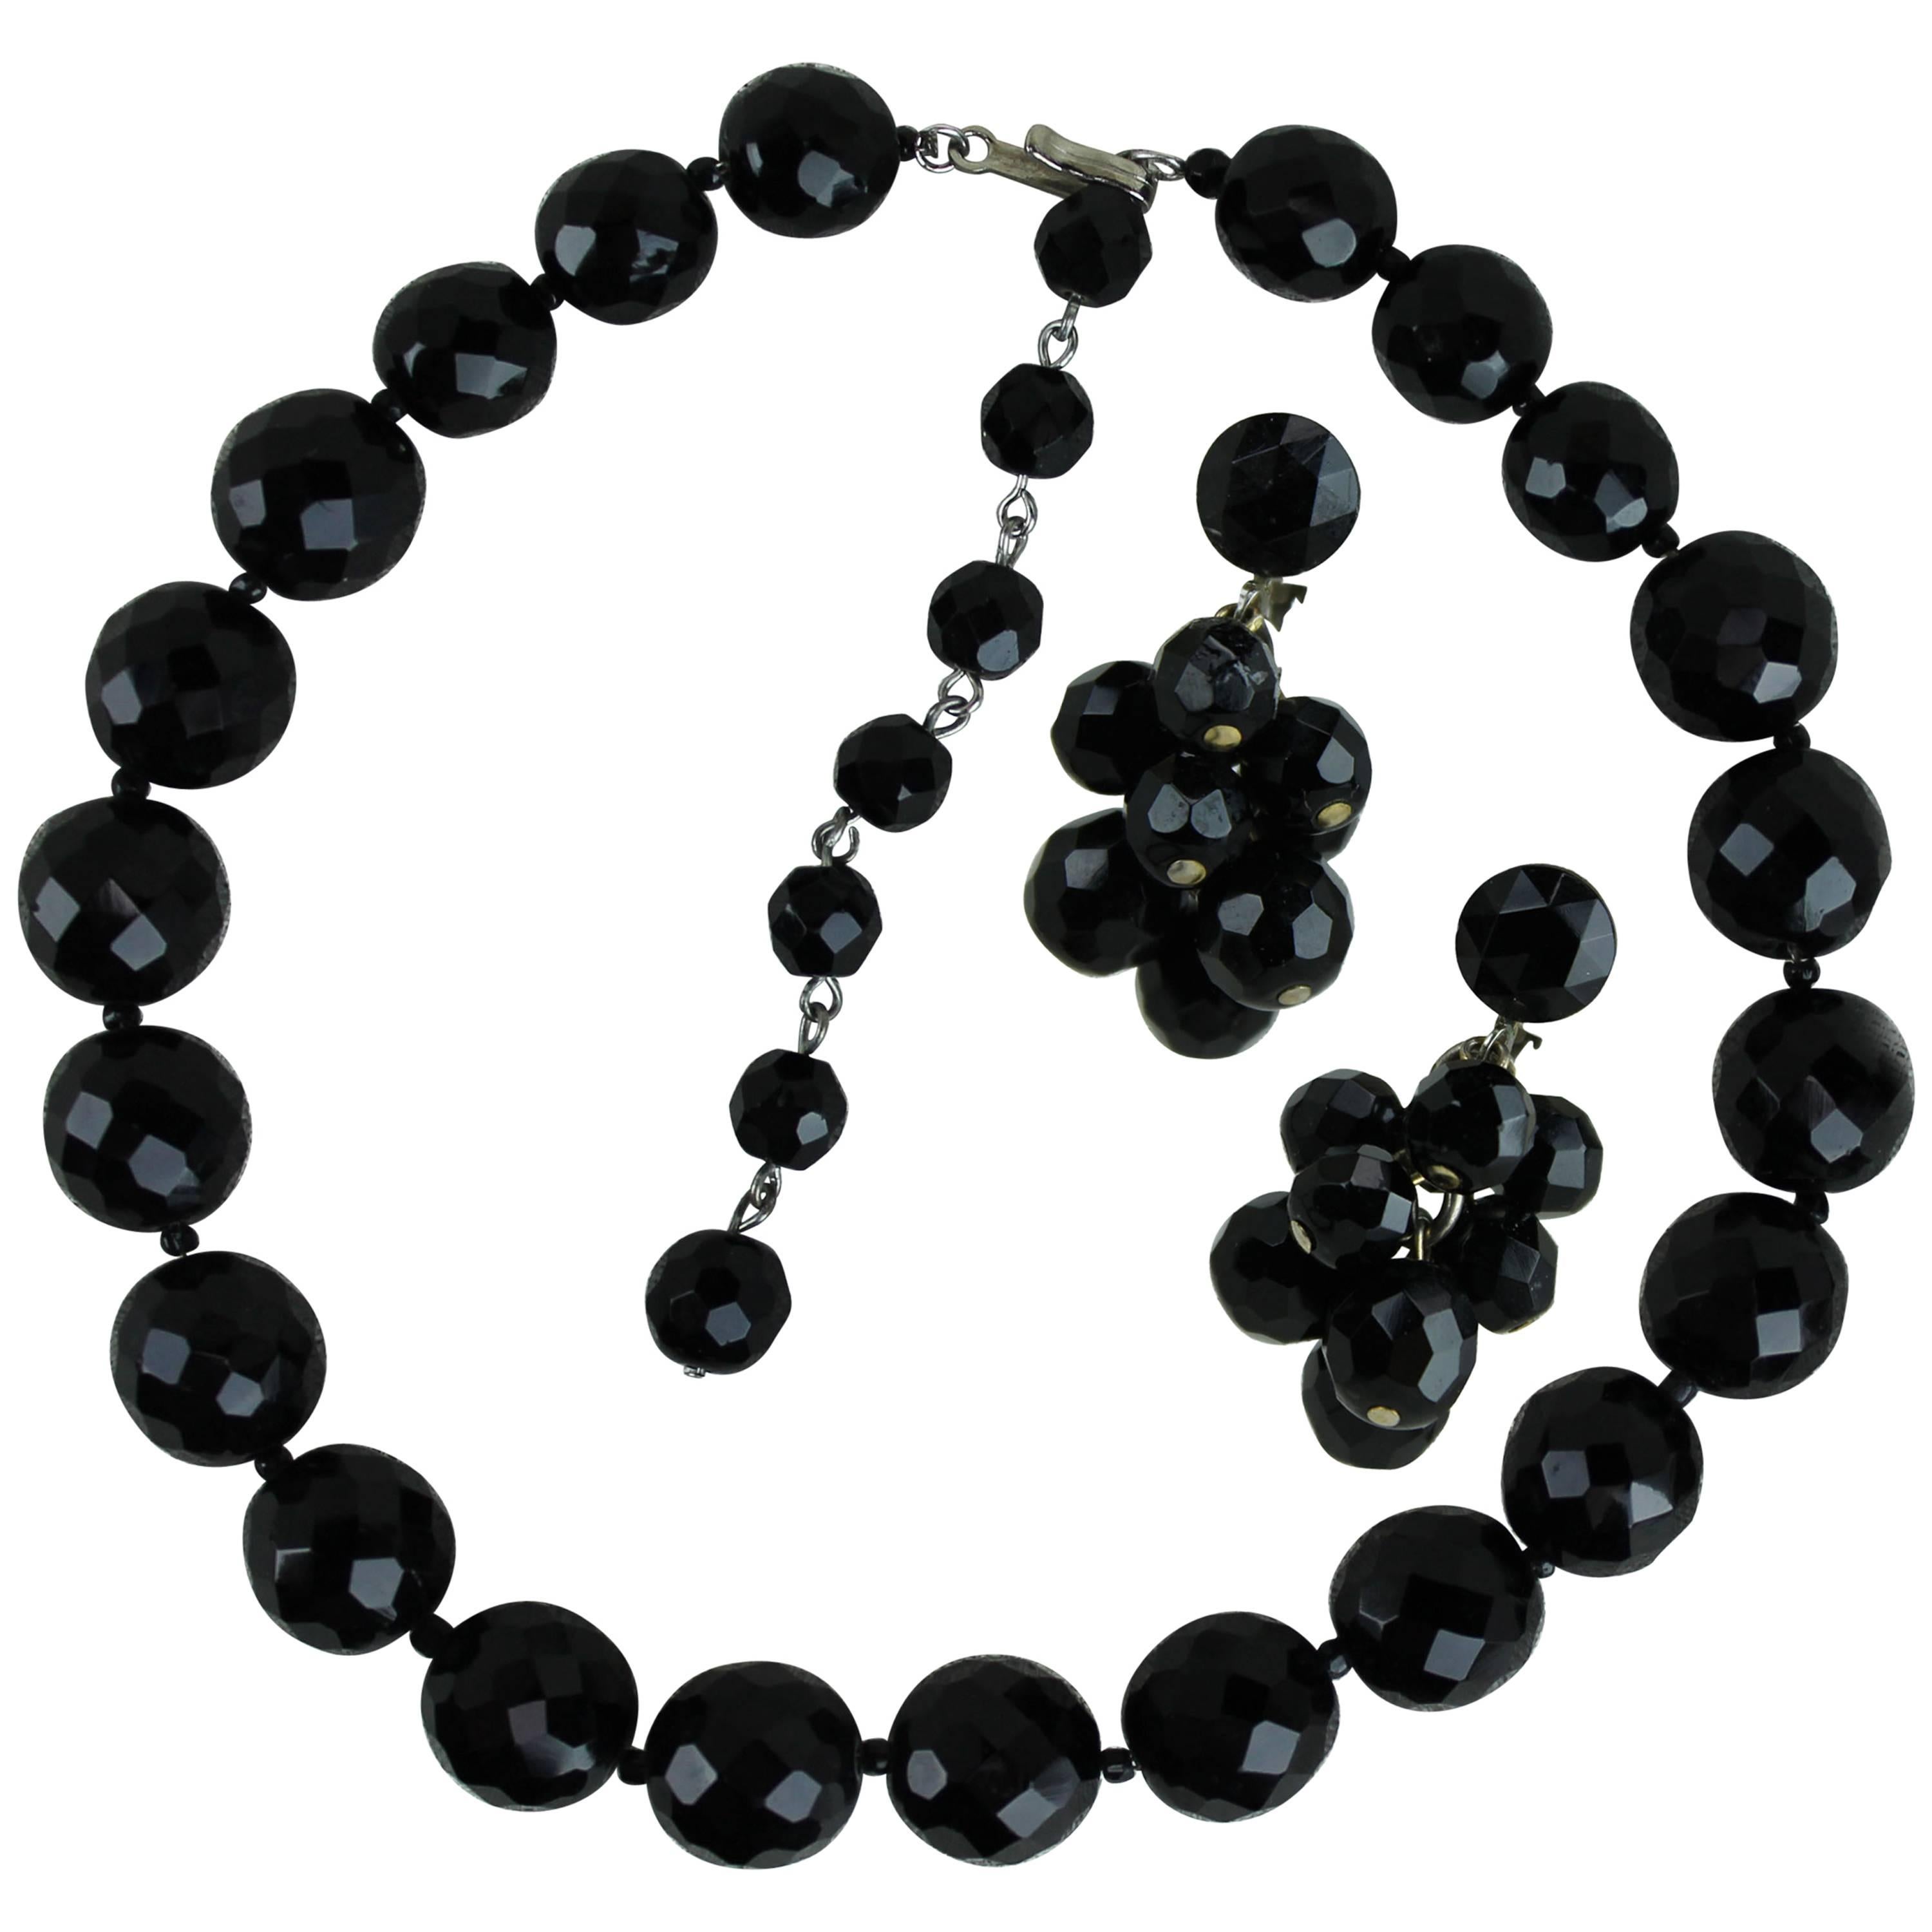 Vintage Hobé Jet Black Faceted Glass Bead Choker Necklace and Dangle Earrings